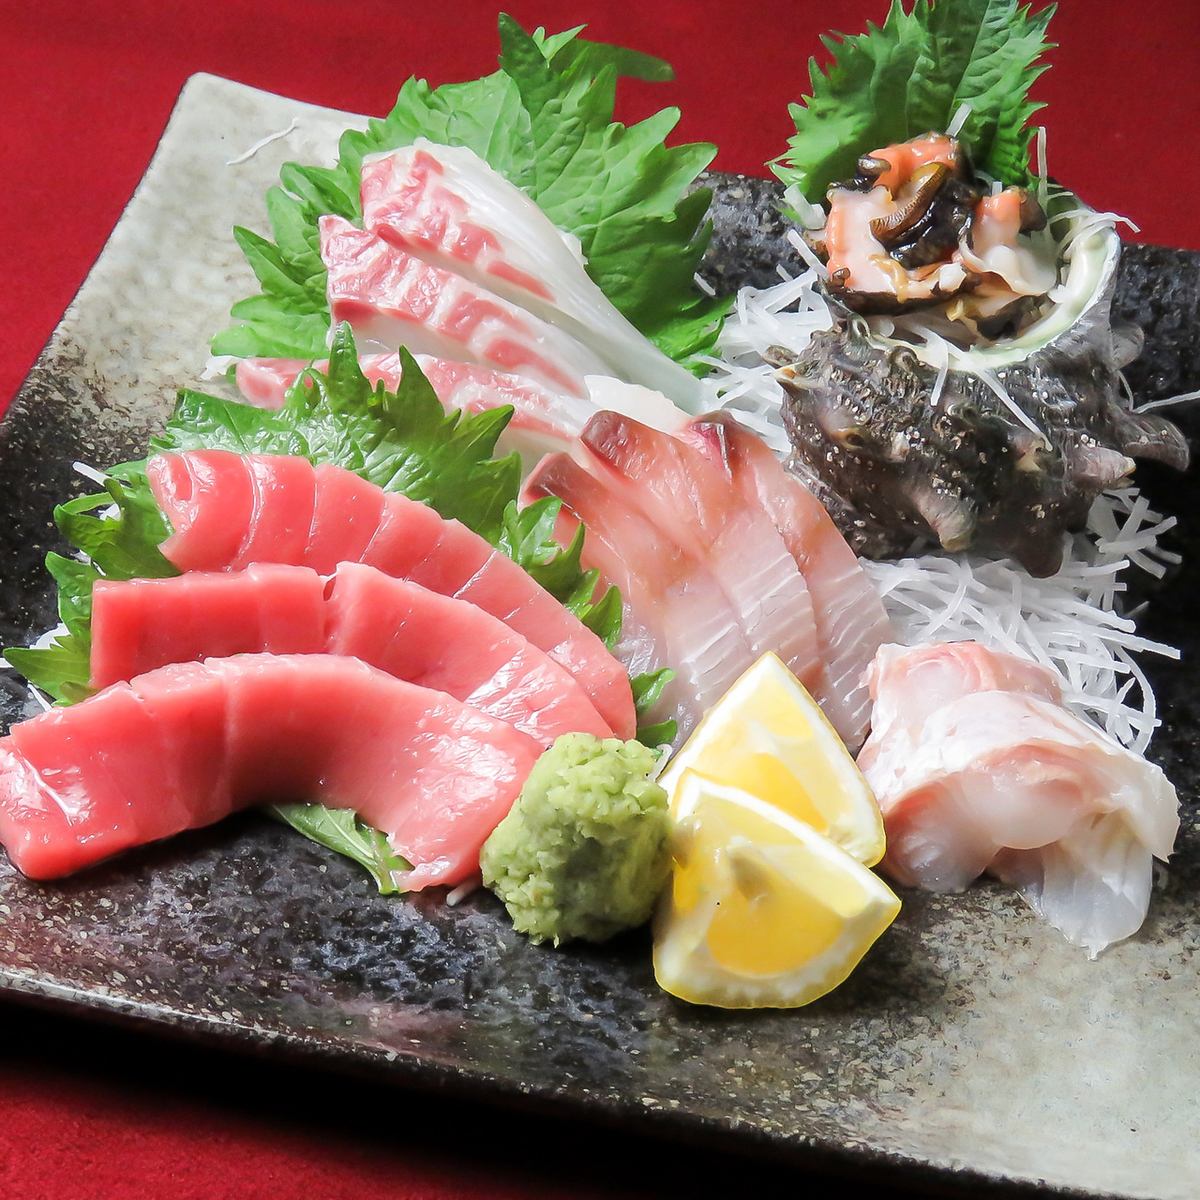 We stock the best recommended fish that day, so you can enjoy fresh sashimi!